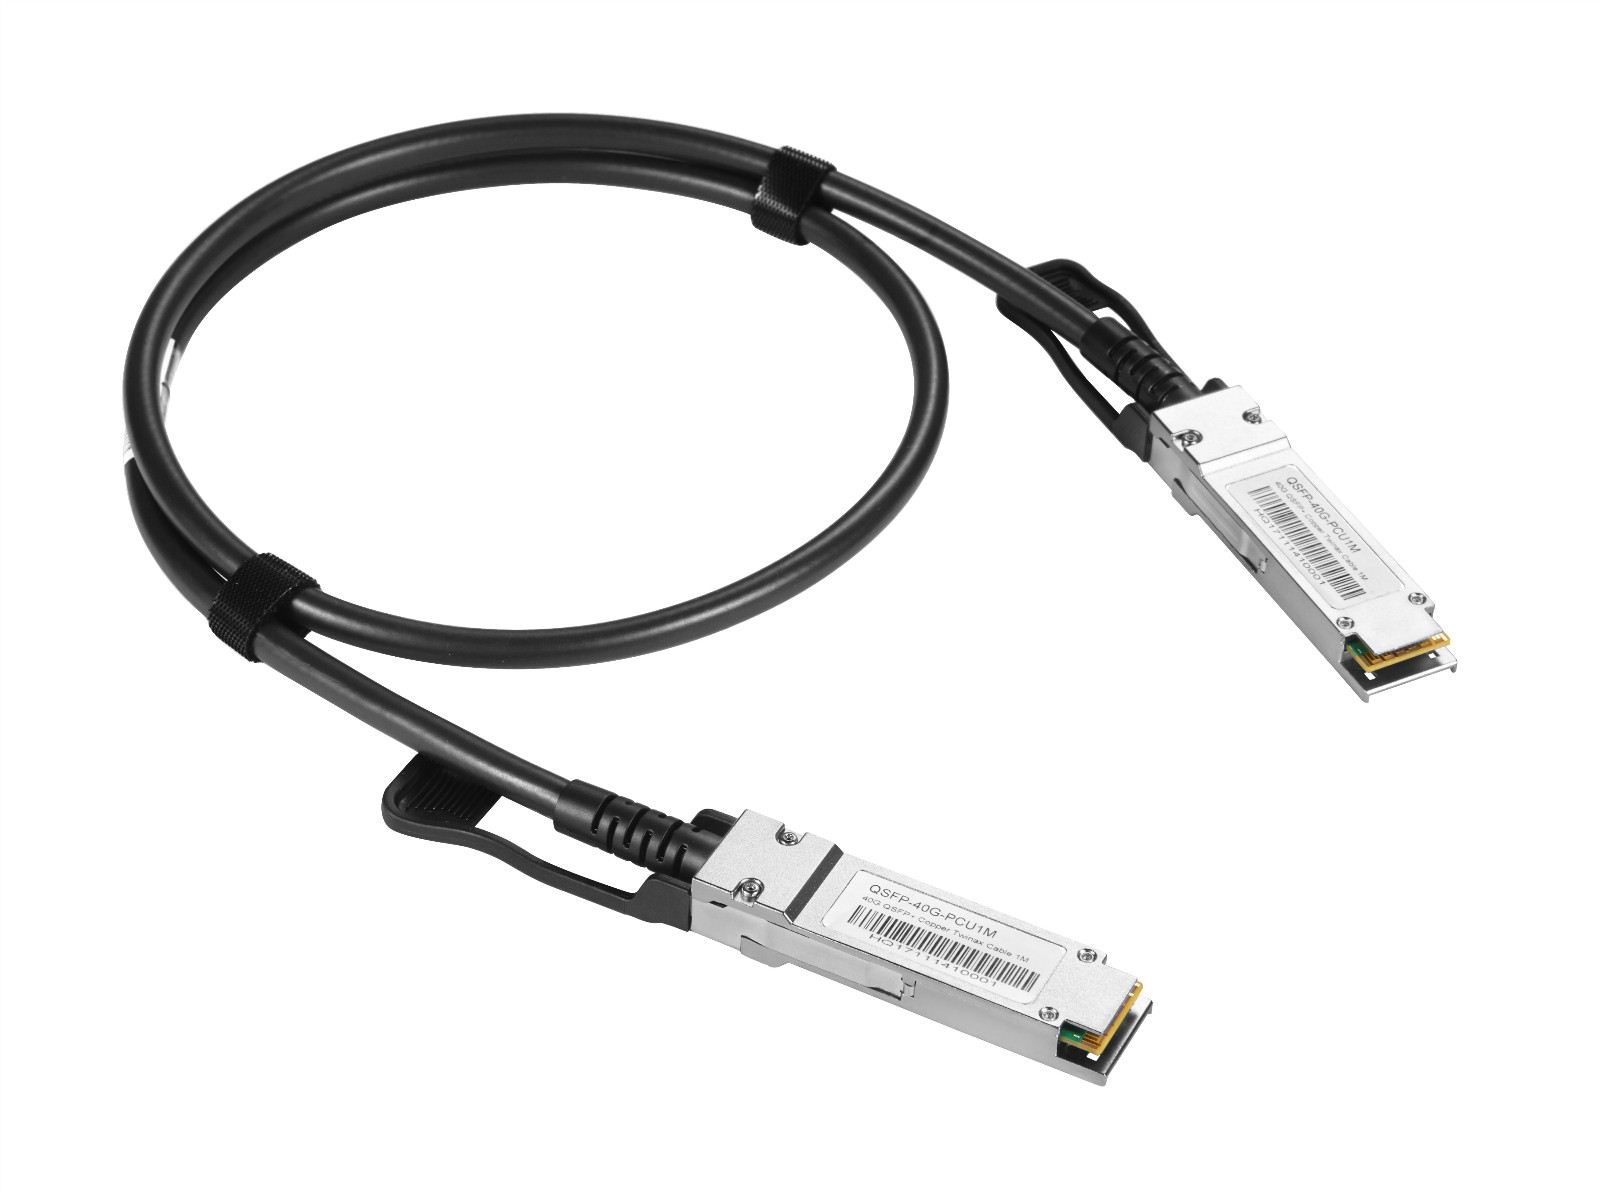 HTD-InforDAC Cable, a professional one-stop service of10G S